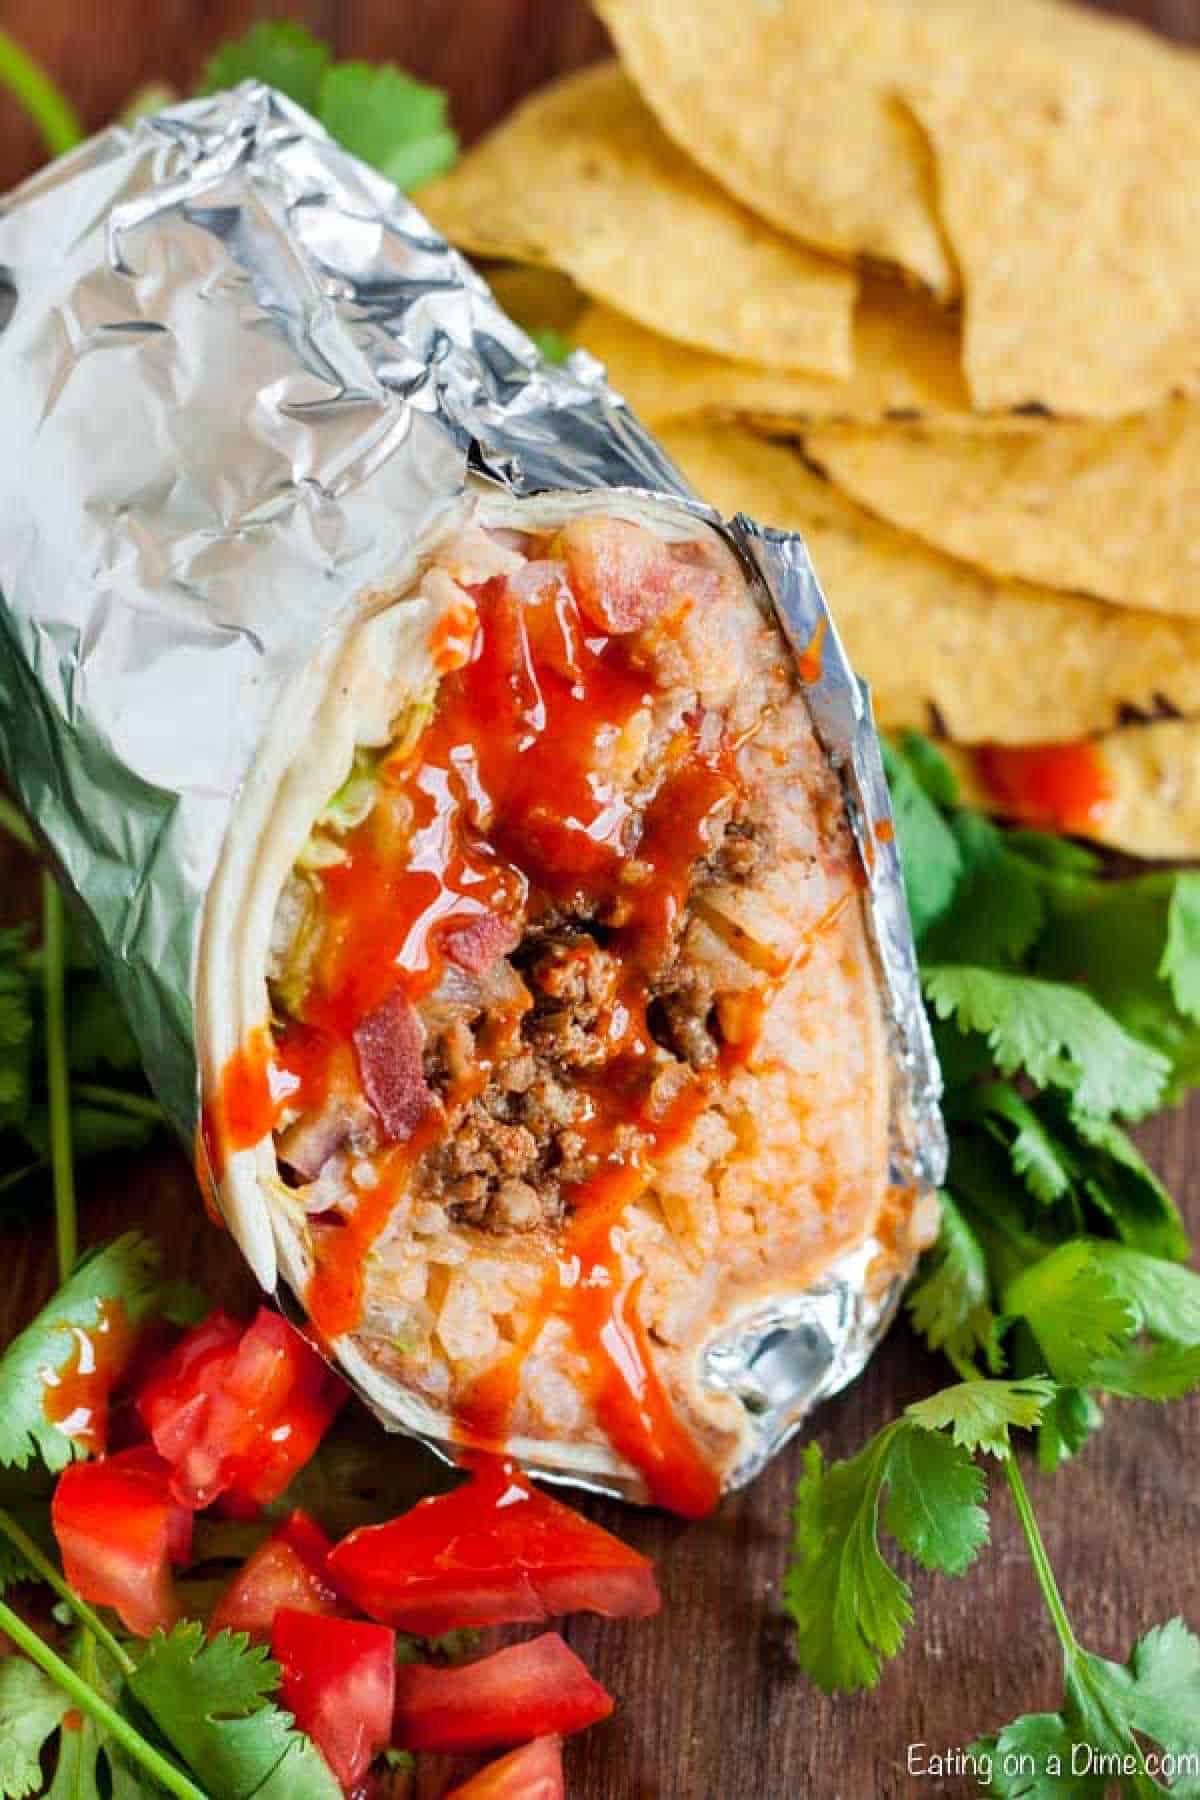 Burrito wrapped in foil cut in half and loaded with beef, white rice, Rotel and melted cheese with a side of tortilla chips